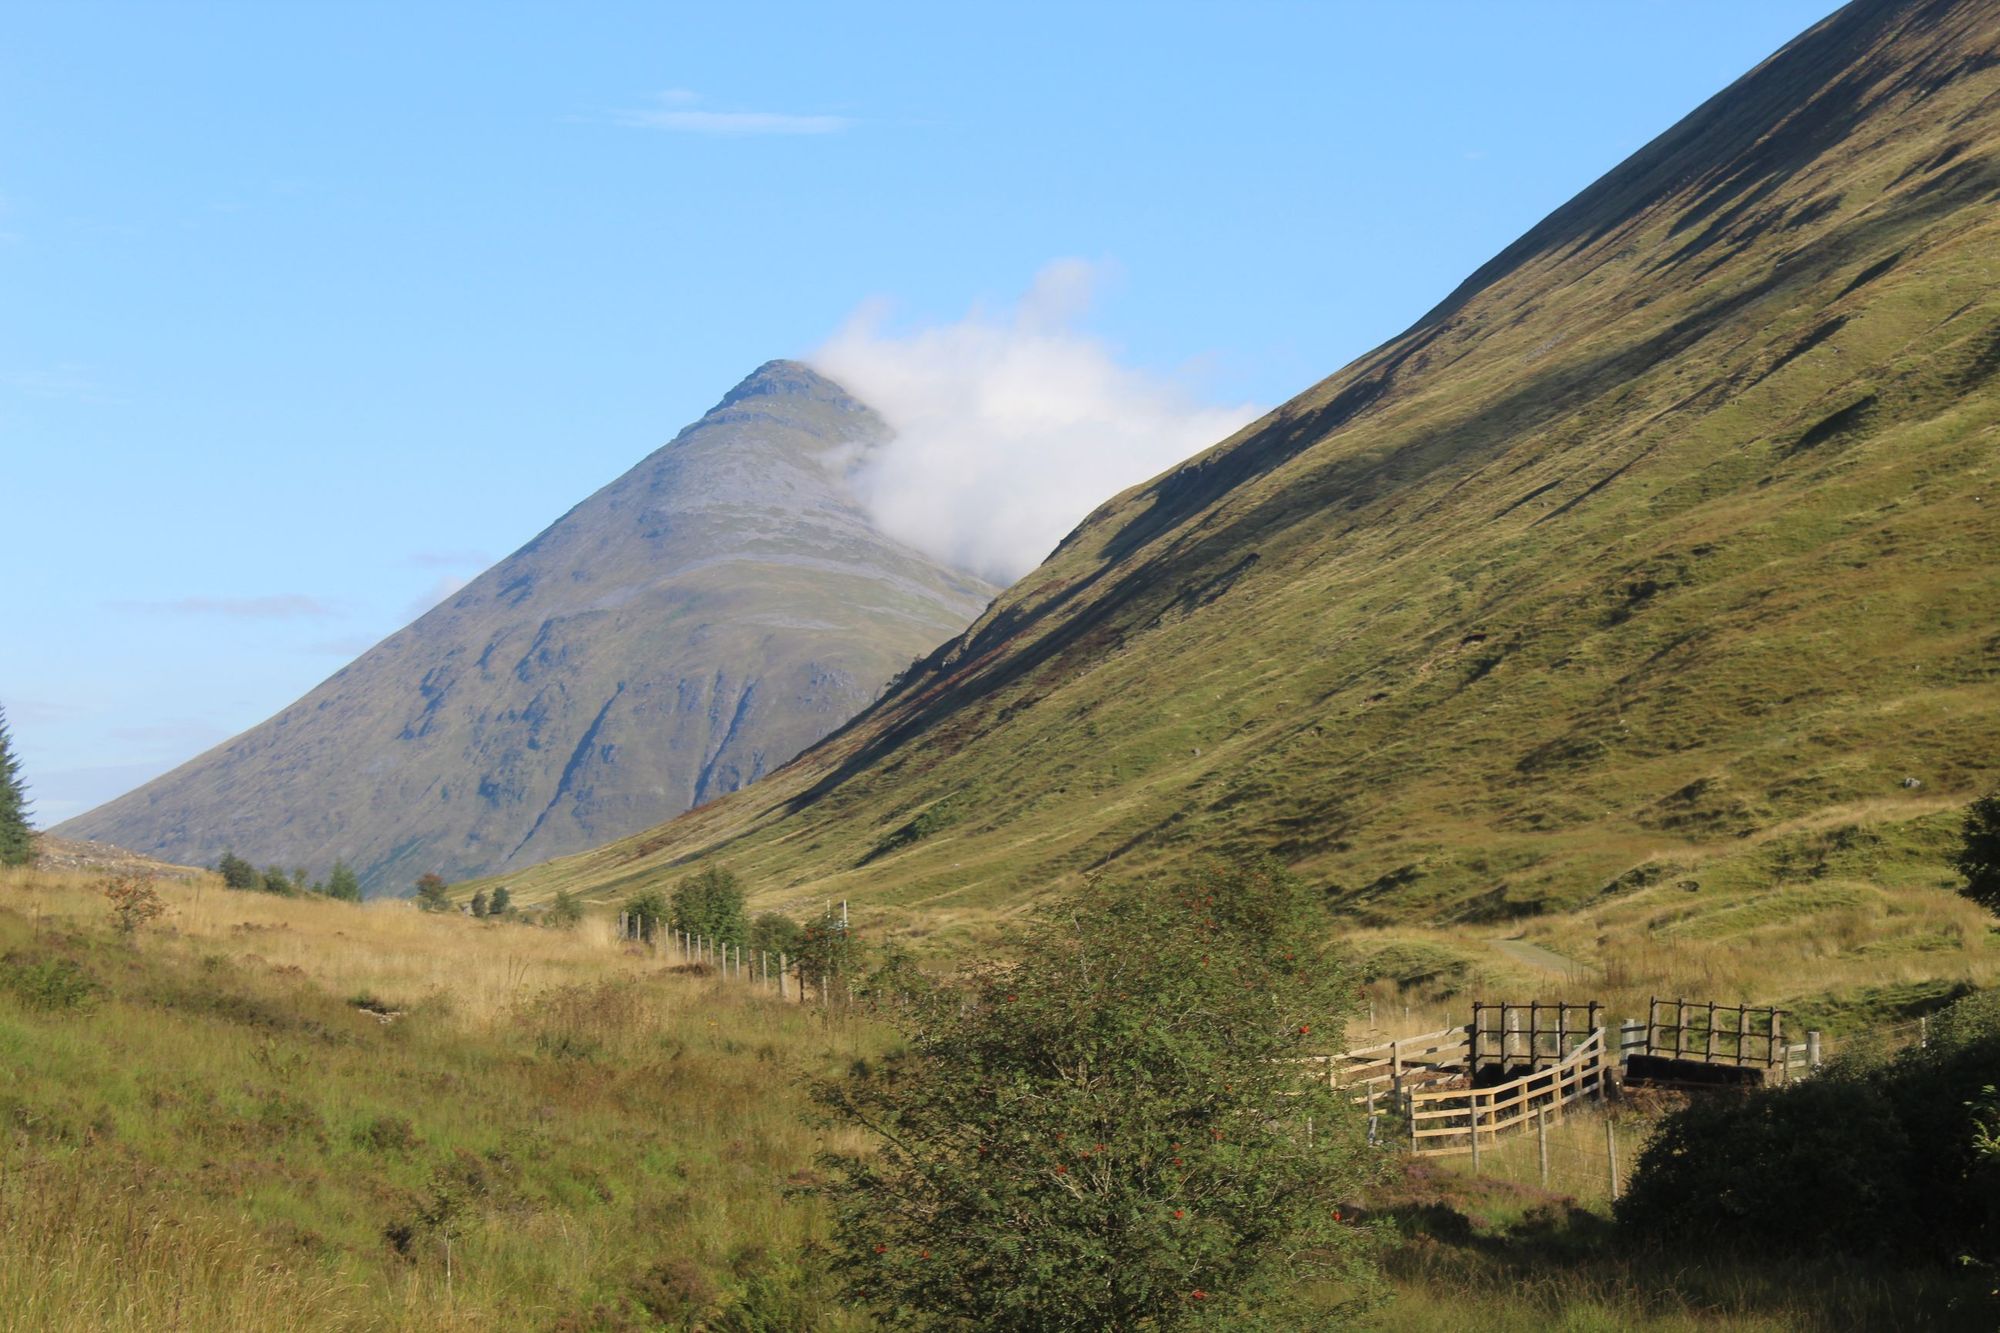 The mountain of Beinn Dorain emerges from the clouds on a sunny day on the West Highland Way